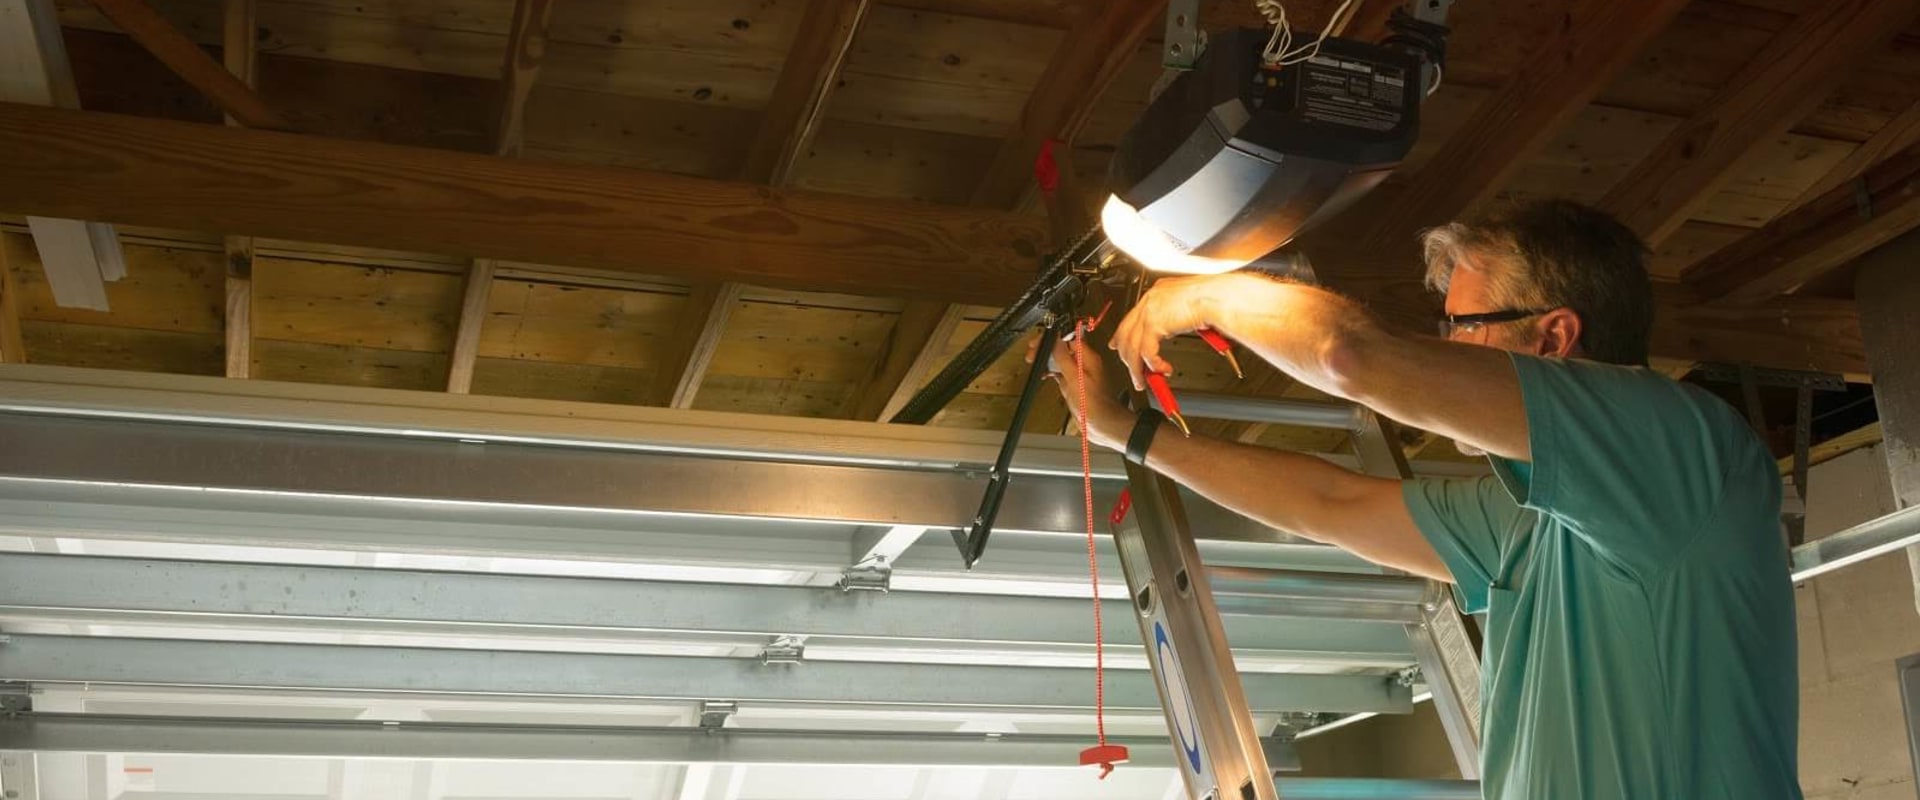 How Long Does it Take to Install a New Garage Door Opener?